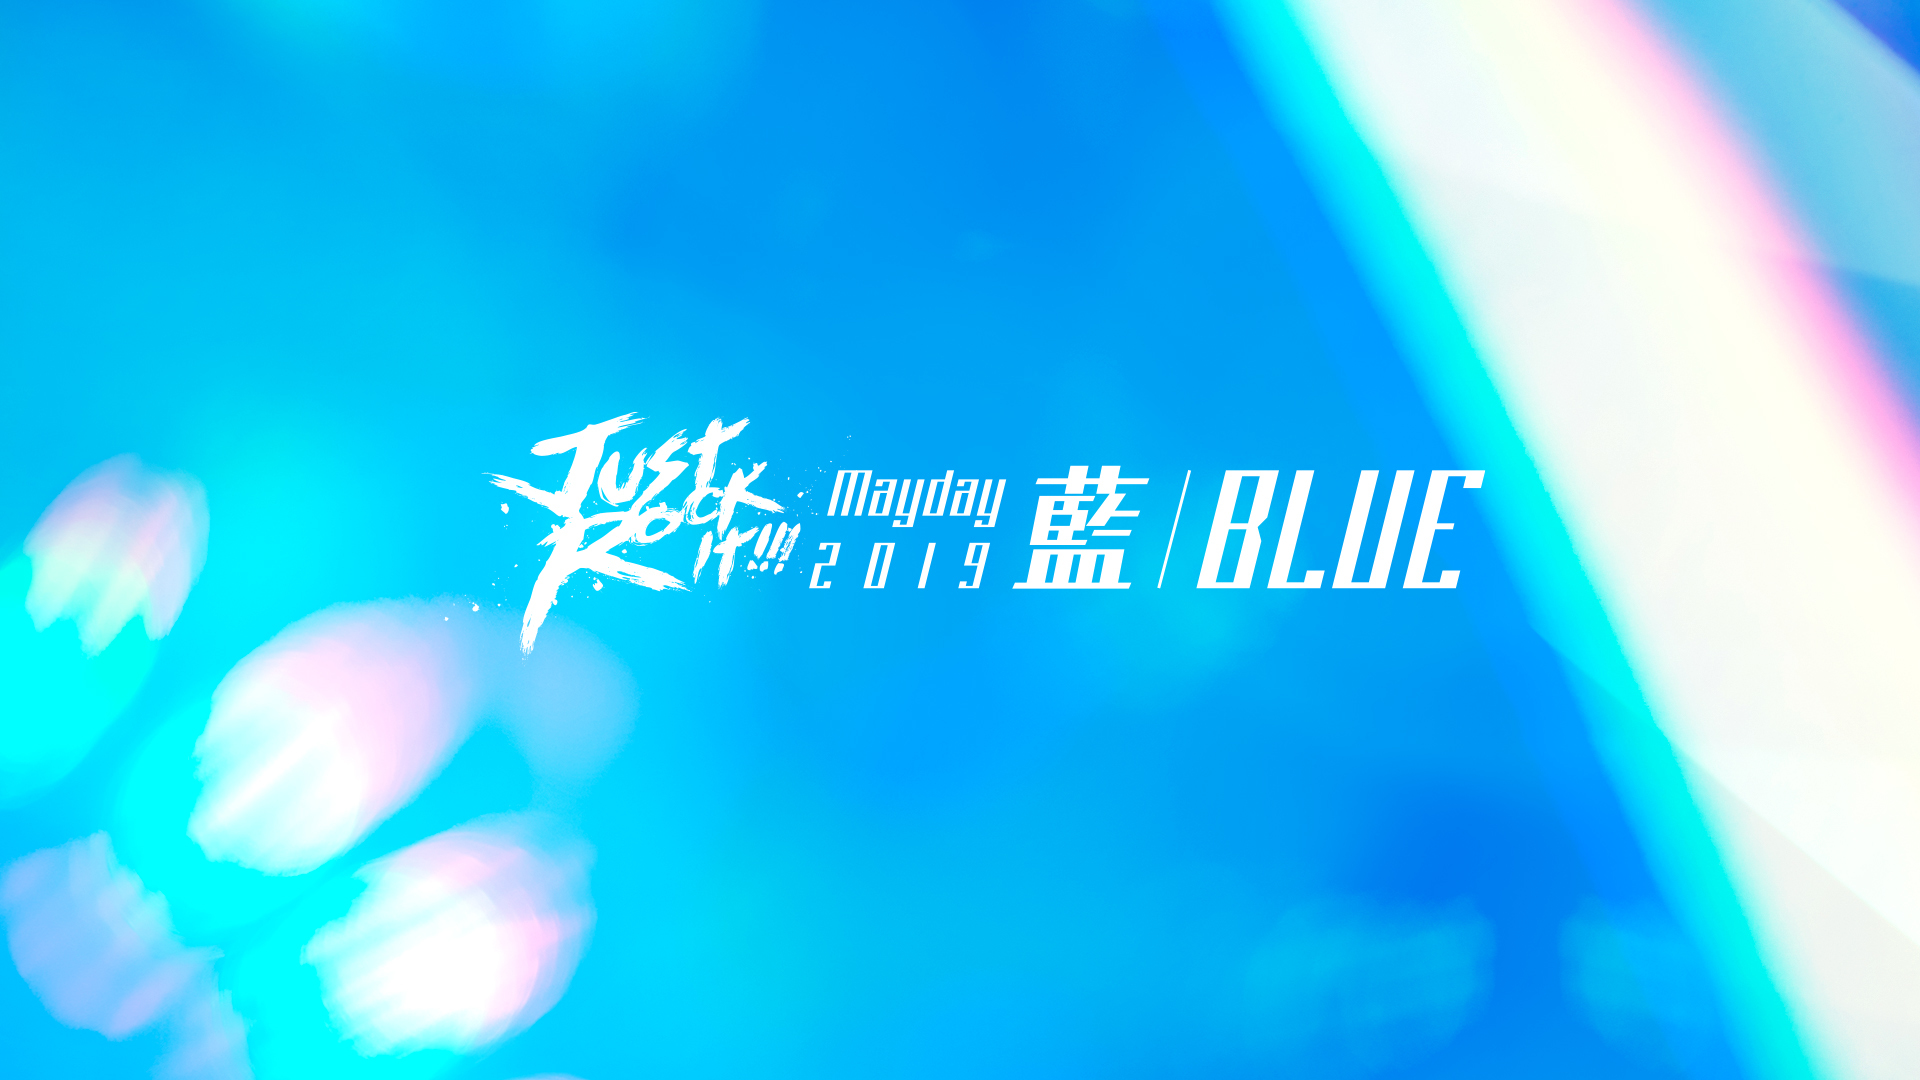 Mayday 2019 Just Rock It!!!  “藍 | BLUE“